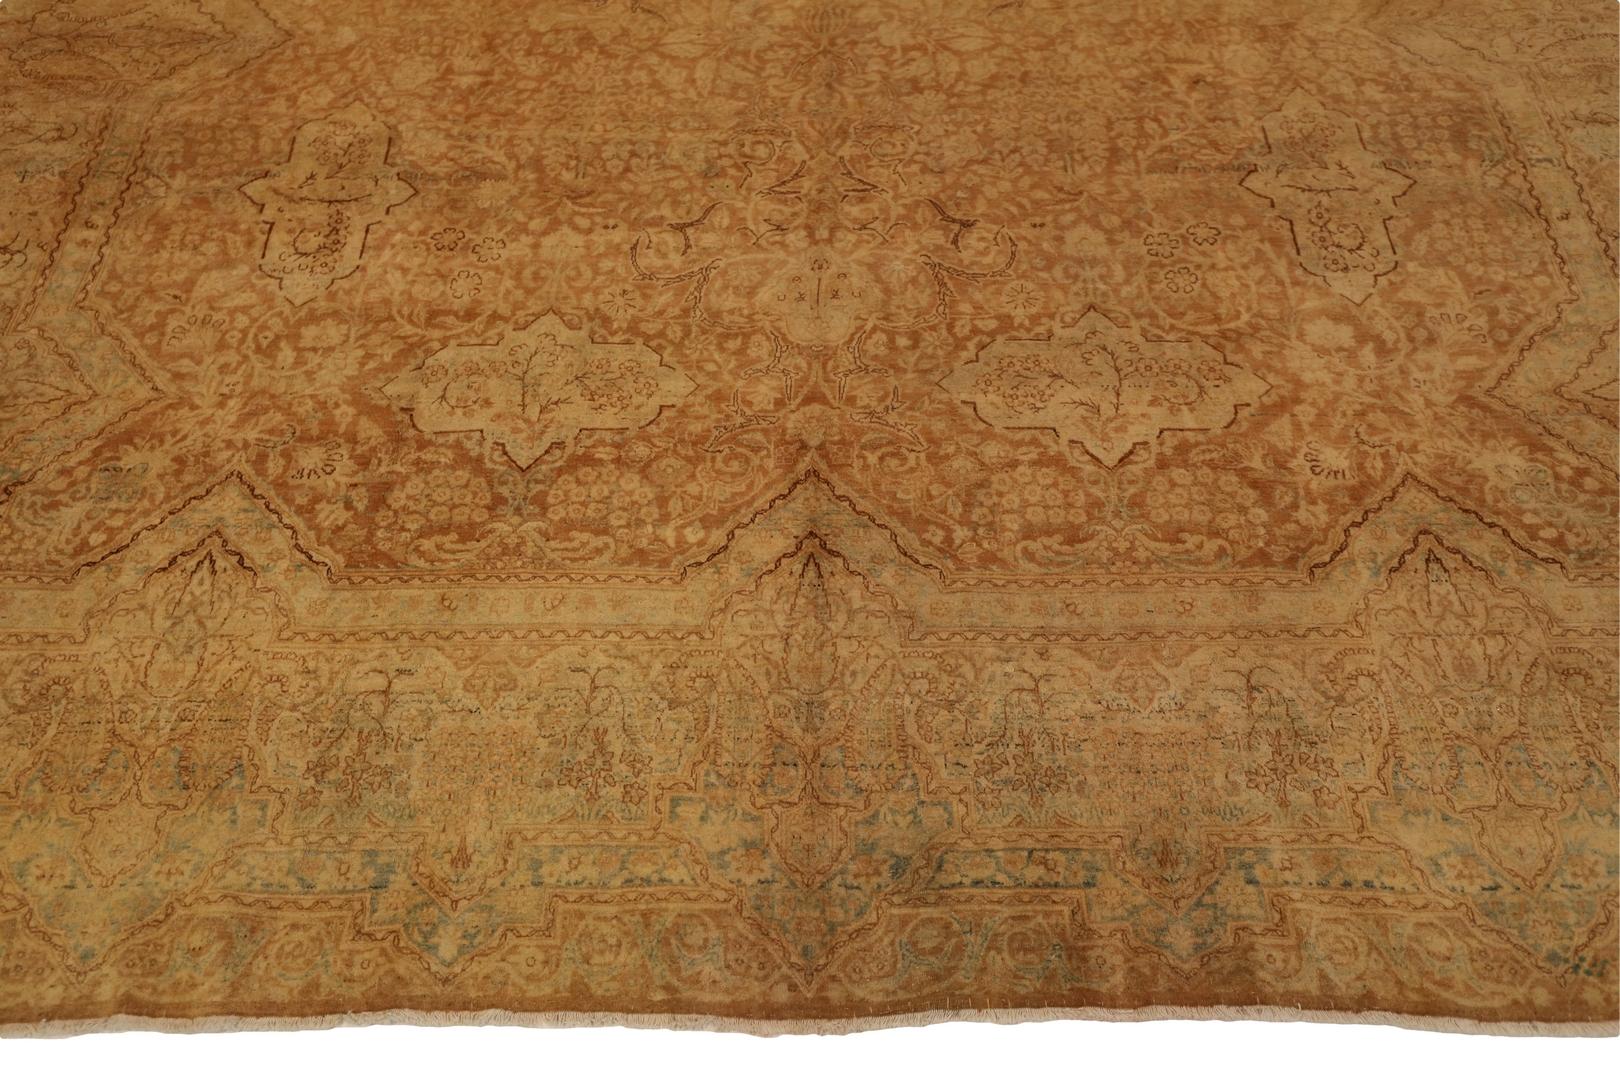 Indulge in the opulence of the Kerman room-size rug, a true masterpiece of luxury and elegance. Its exquisite design features a stunning array of floral and boteh motifs, delicately woven into the sumptuous fabric. The intricate precision of the